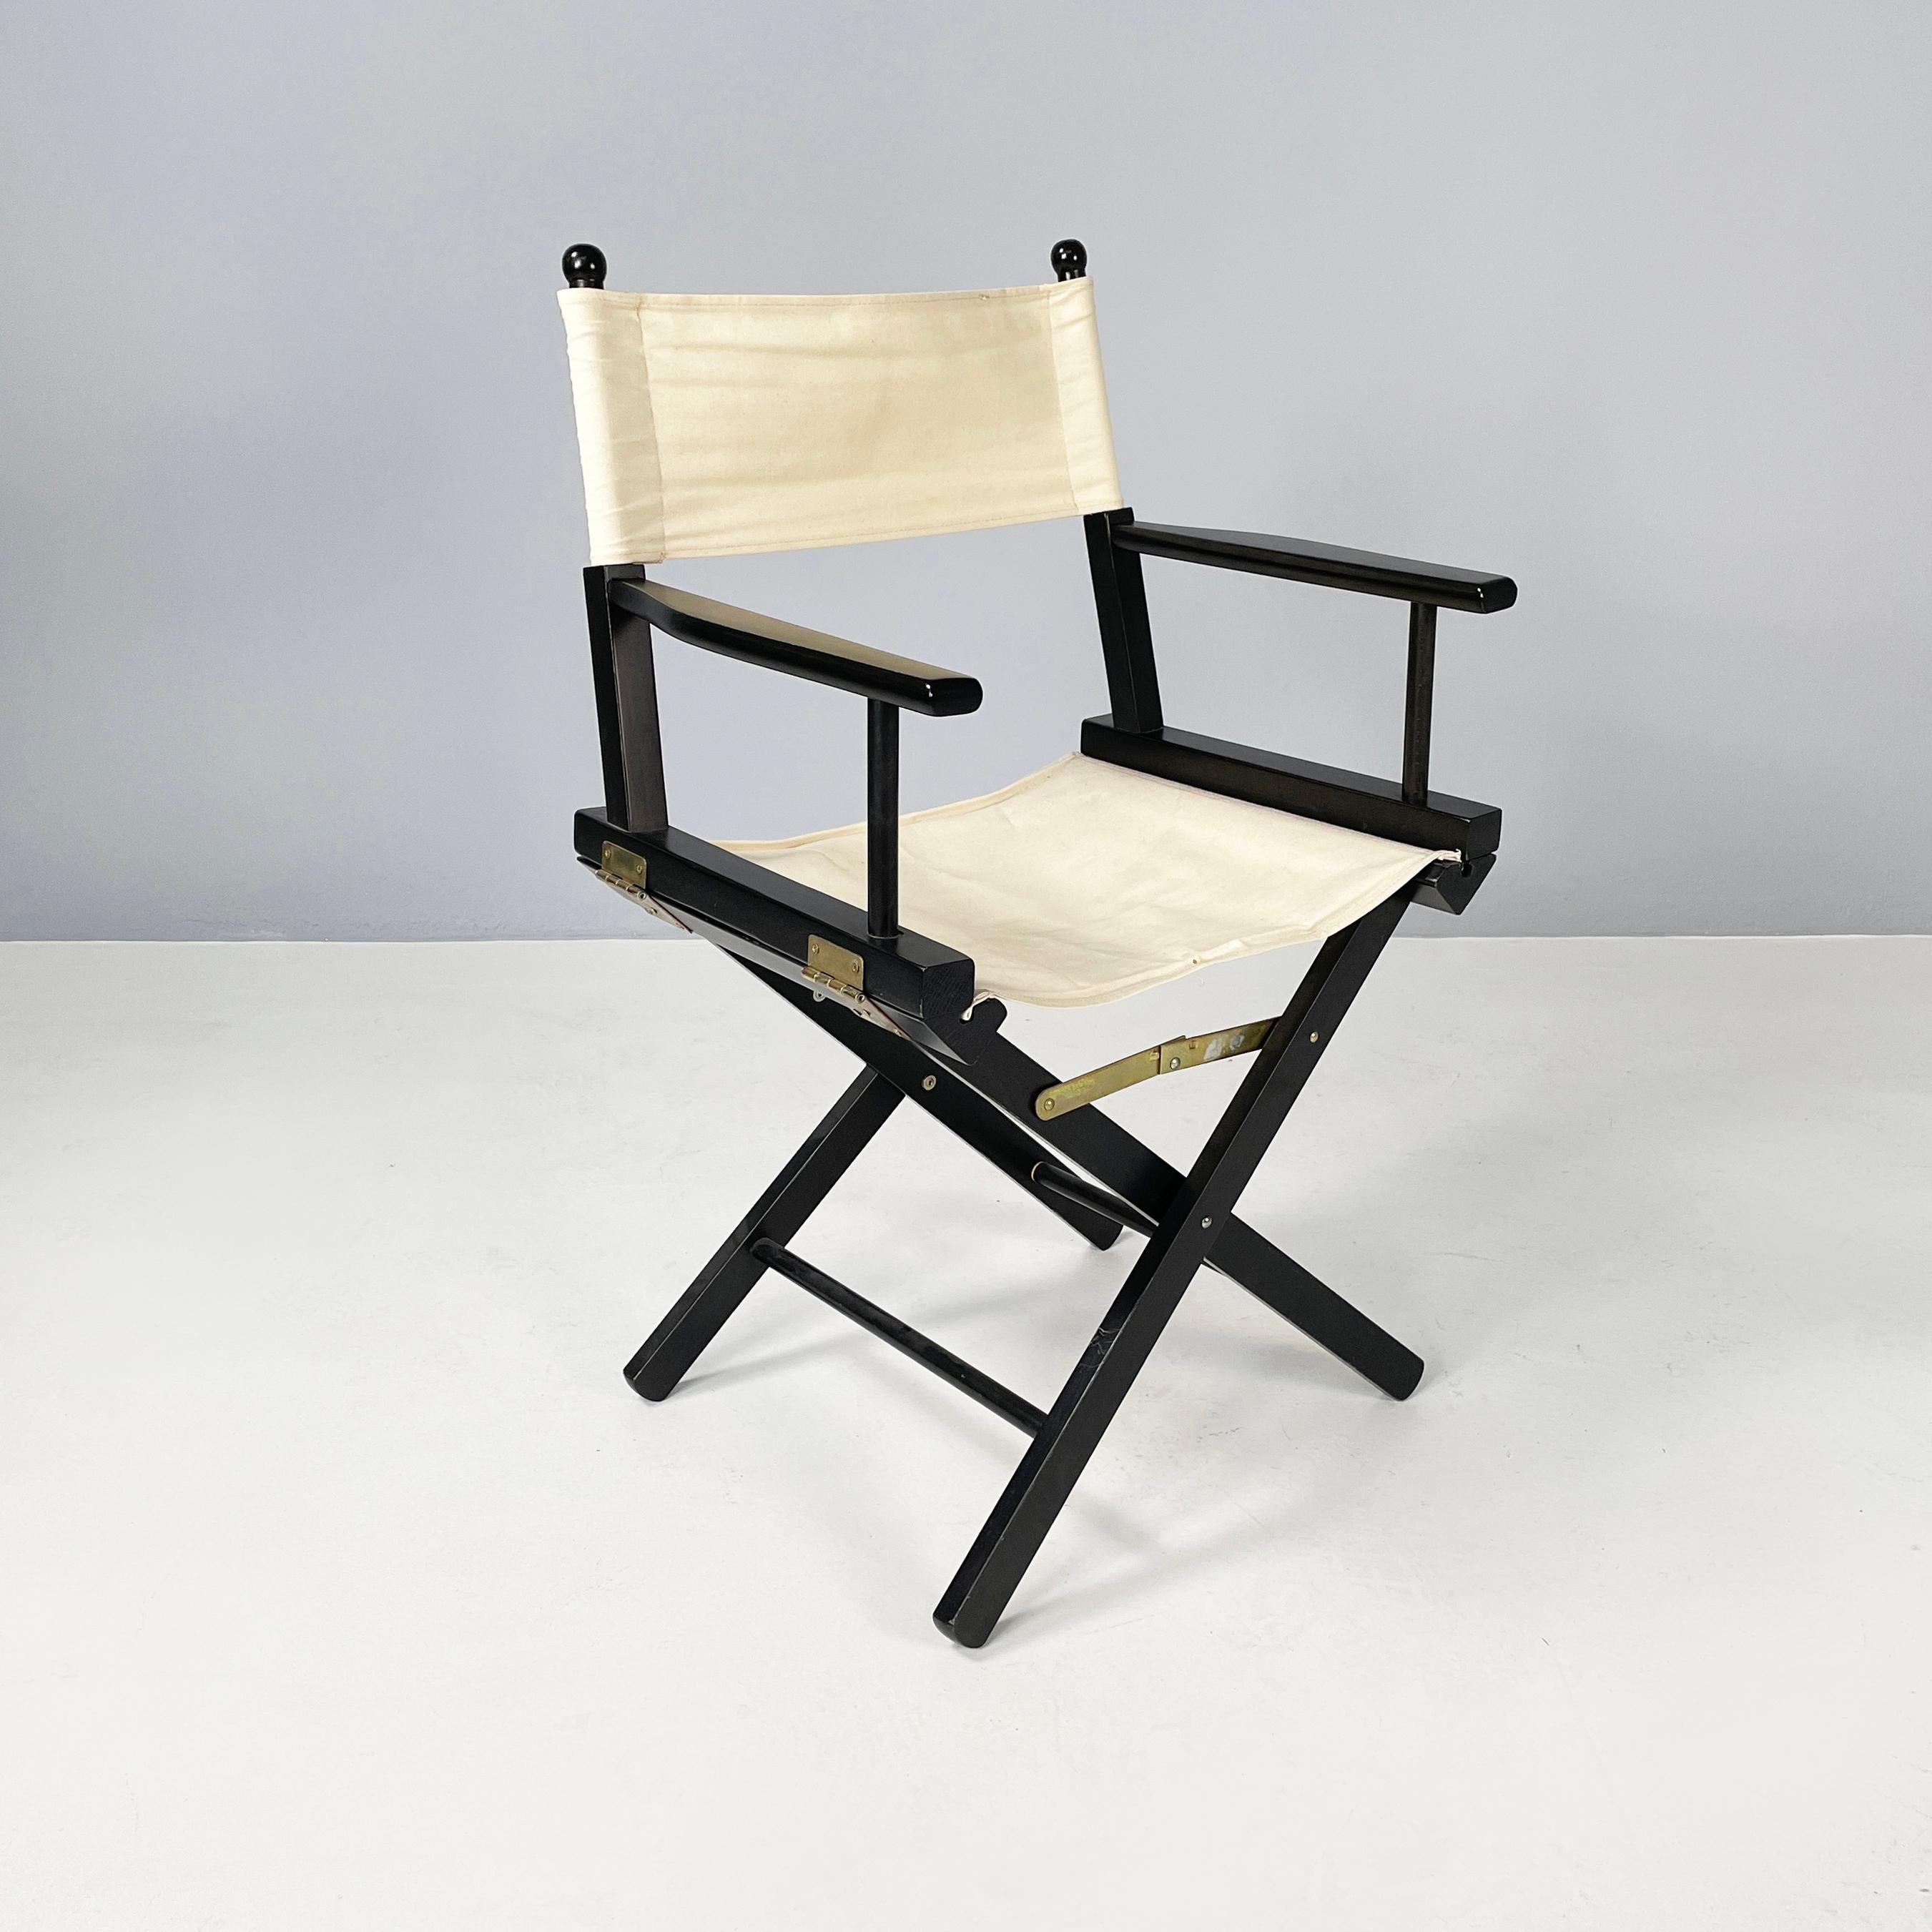 Italian modern Folding director's chairs black wood and white fabric by Calligaris, 1990s
Set of 8 folding director's chairs with black painted wooden structure. The square seat and rectangular backrest are made up of a flap of white fabric,